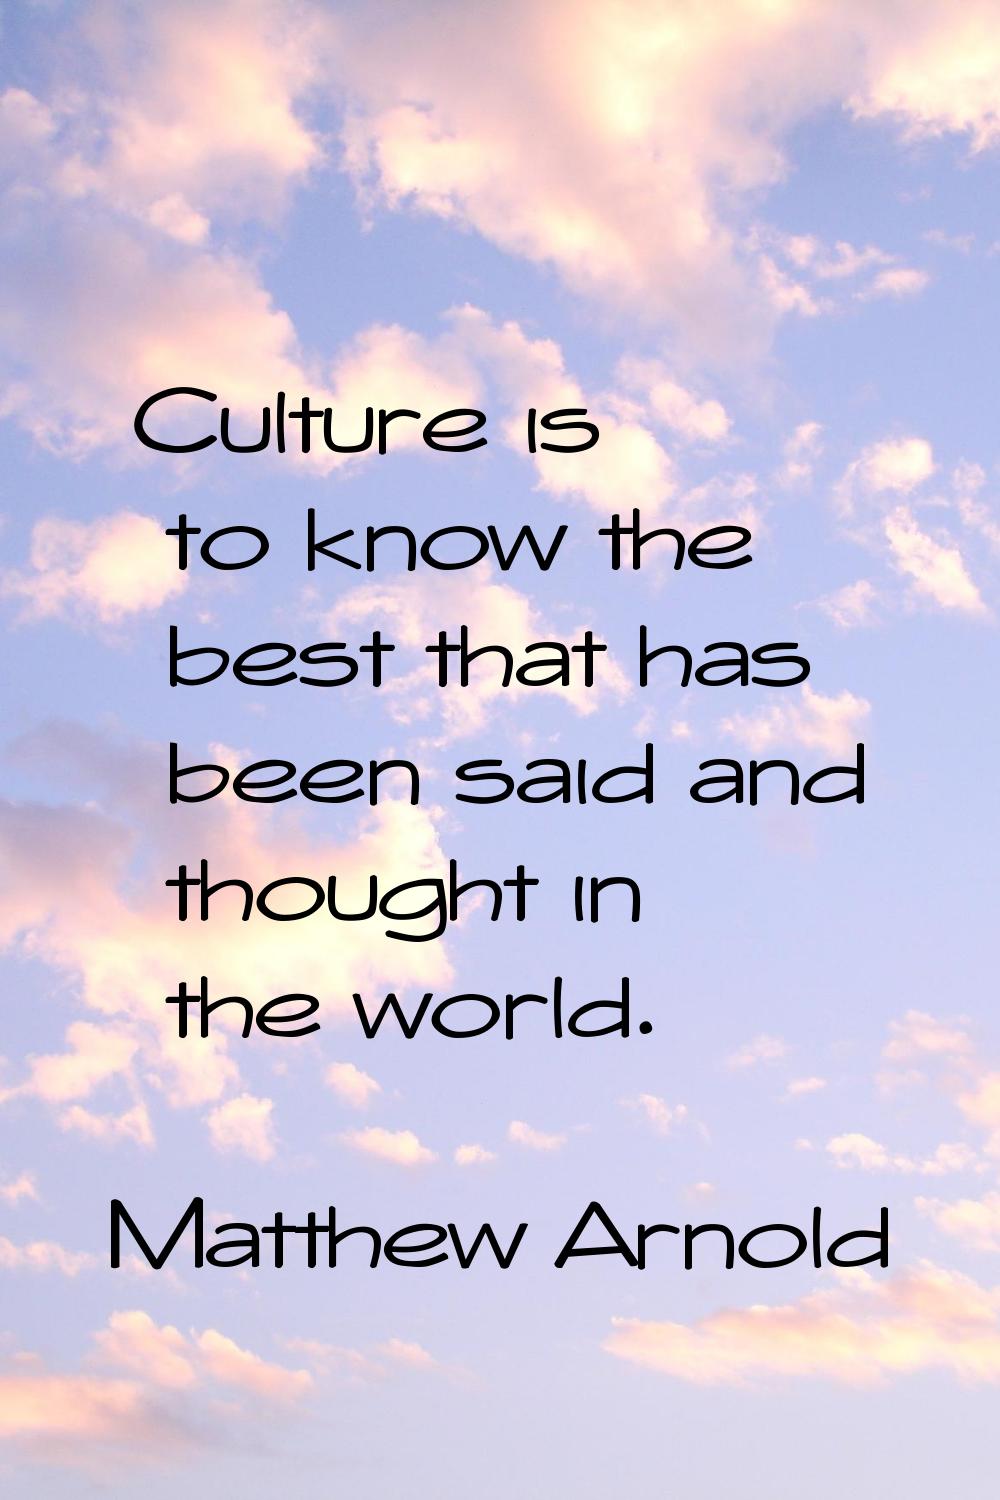 Culture is to know the best that has been said and thought in the world.